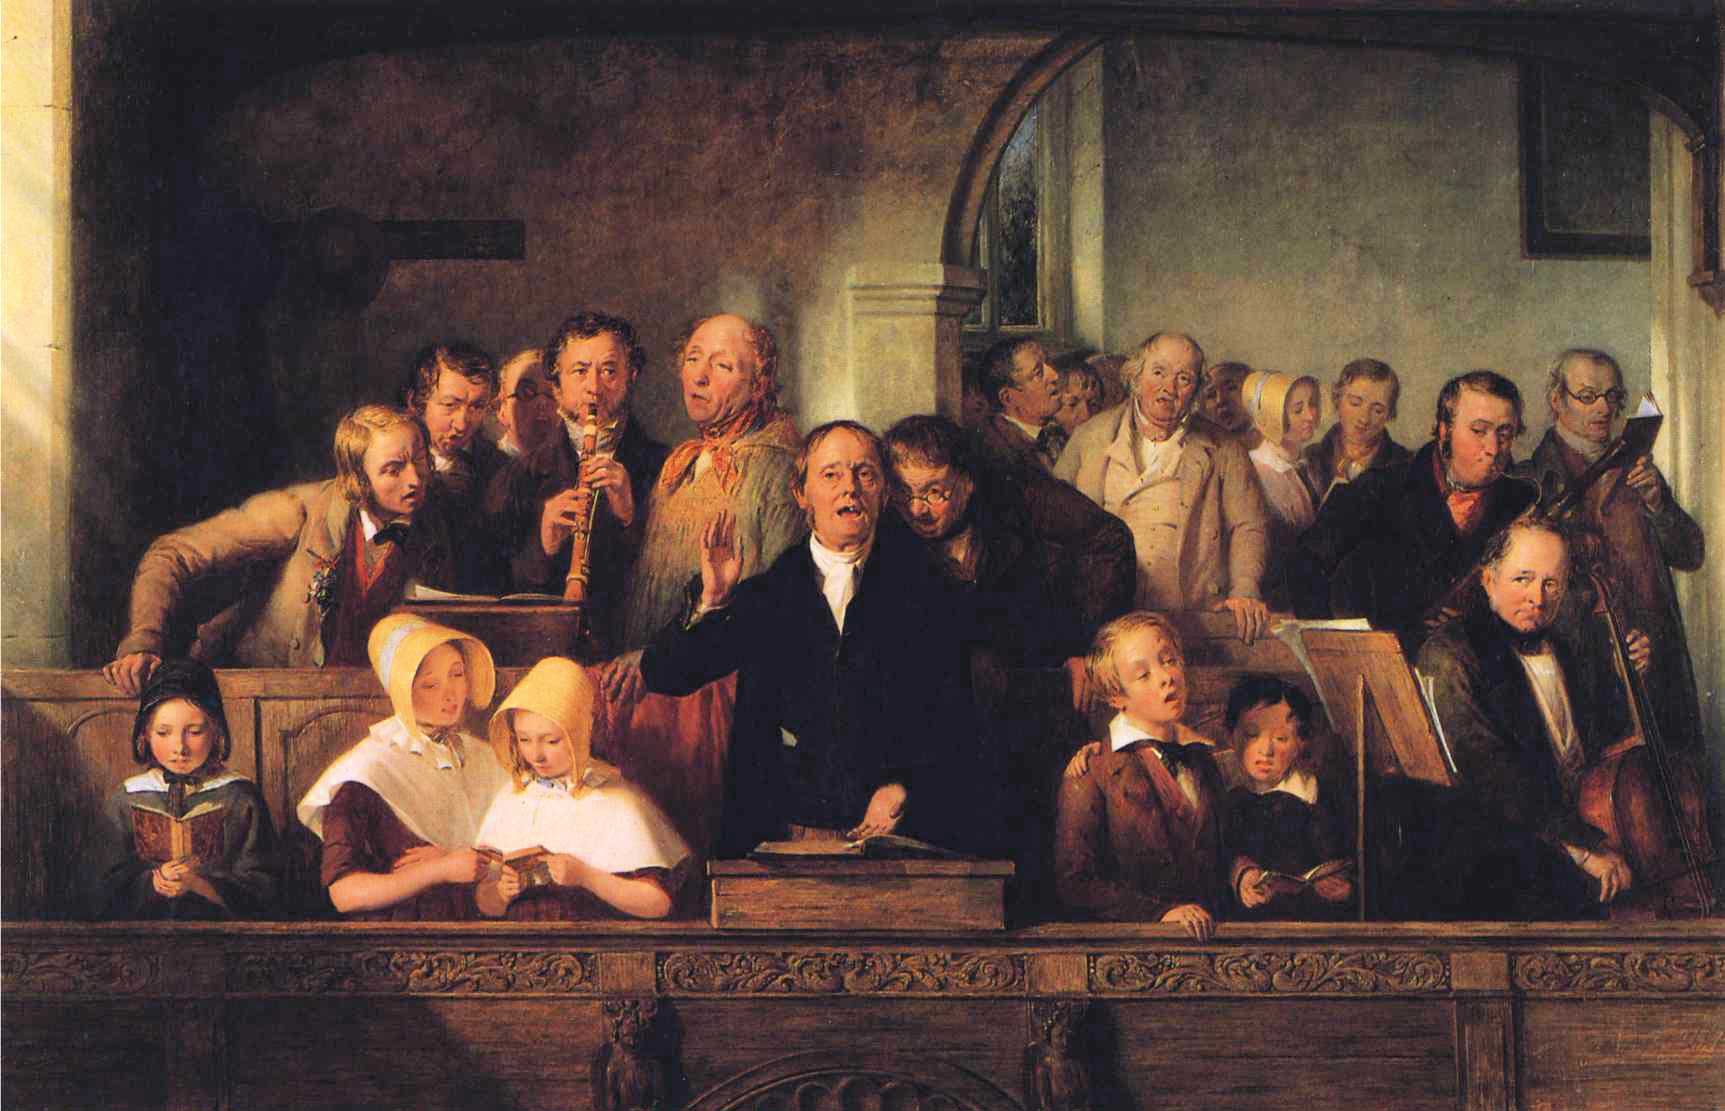 The Village Choir by Thomas Webster